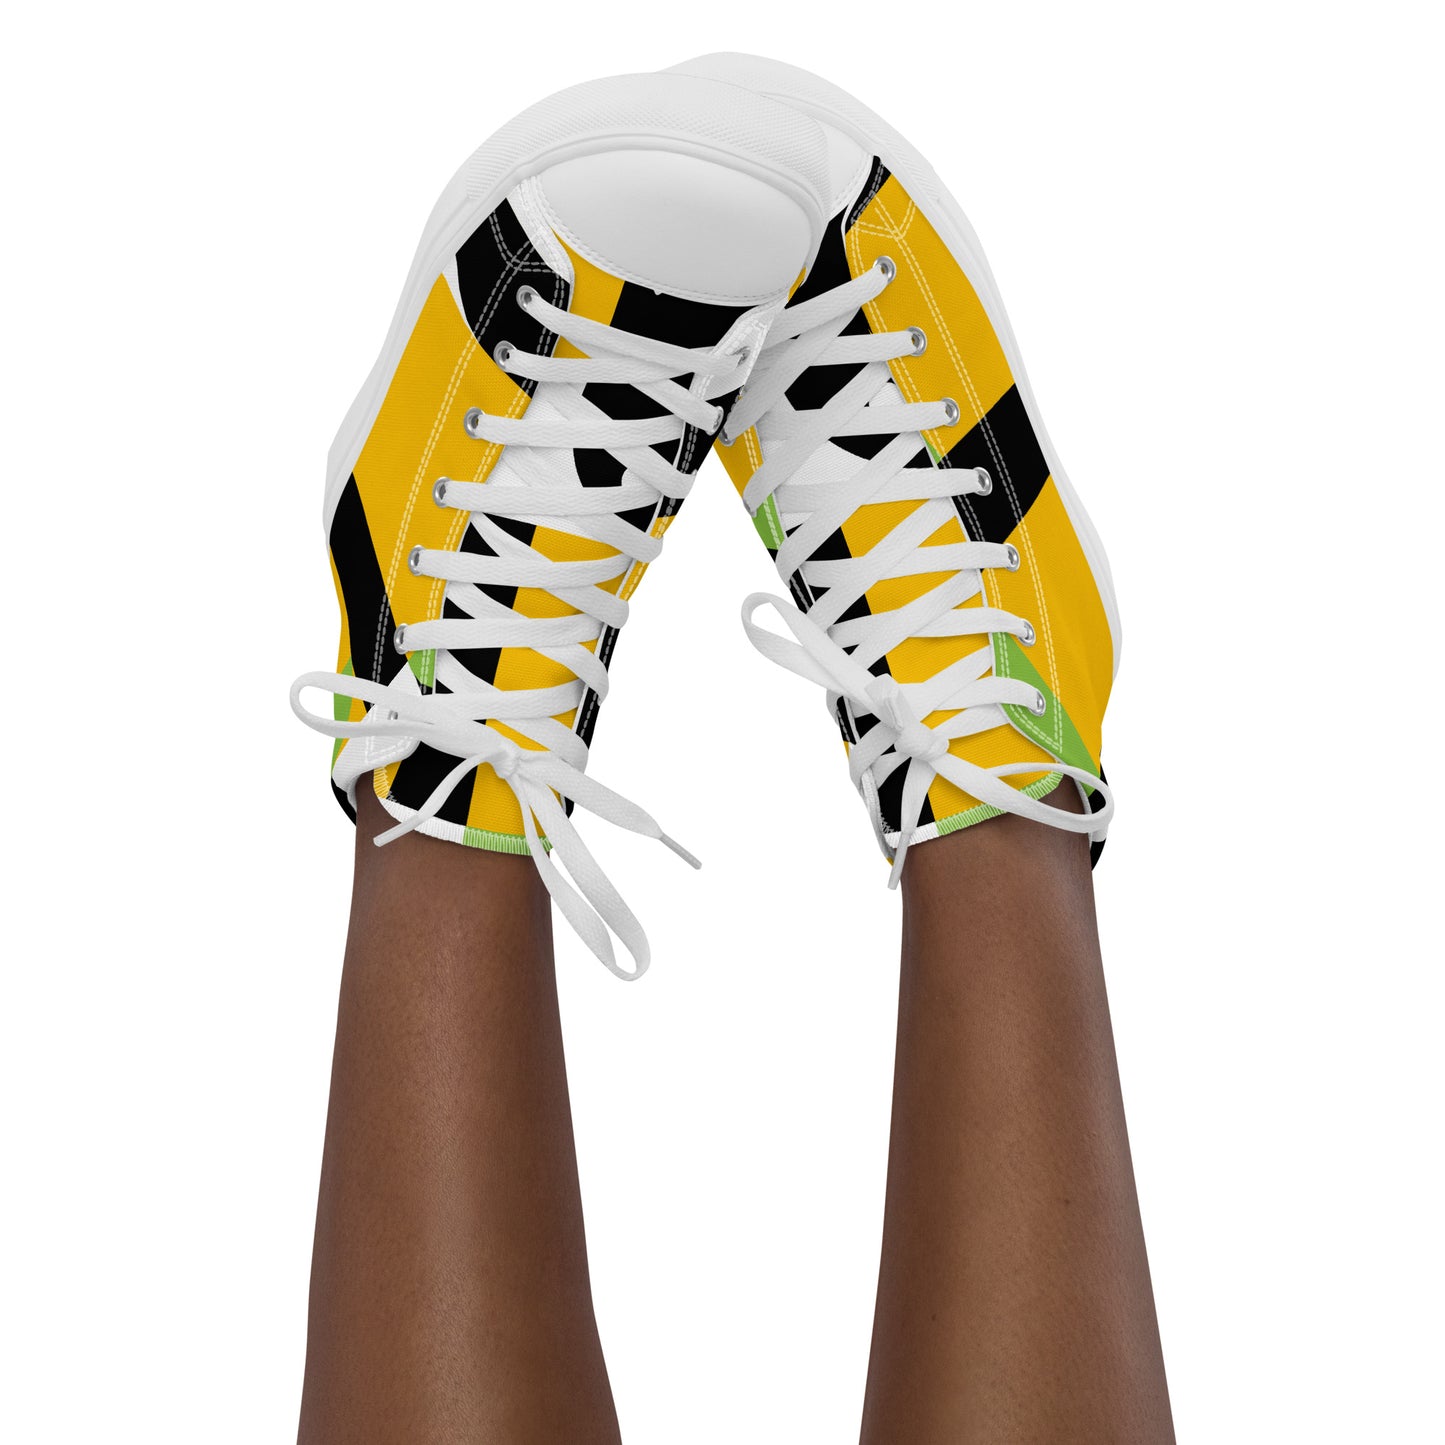 Women’s Taxi high top canvas shoes